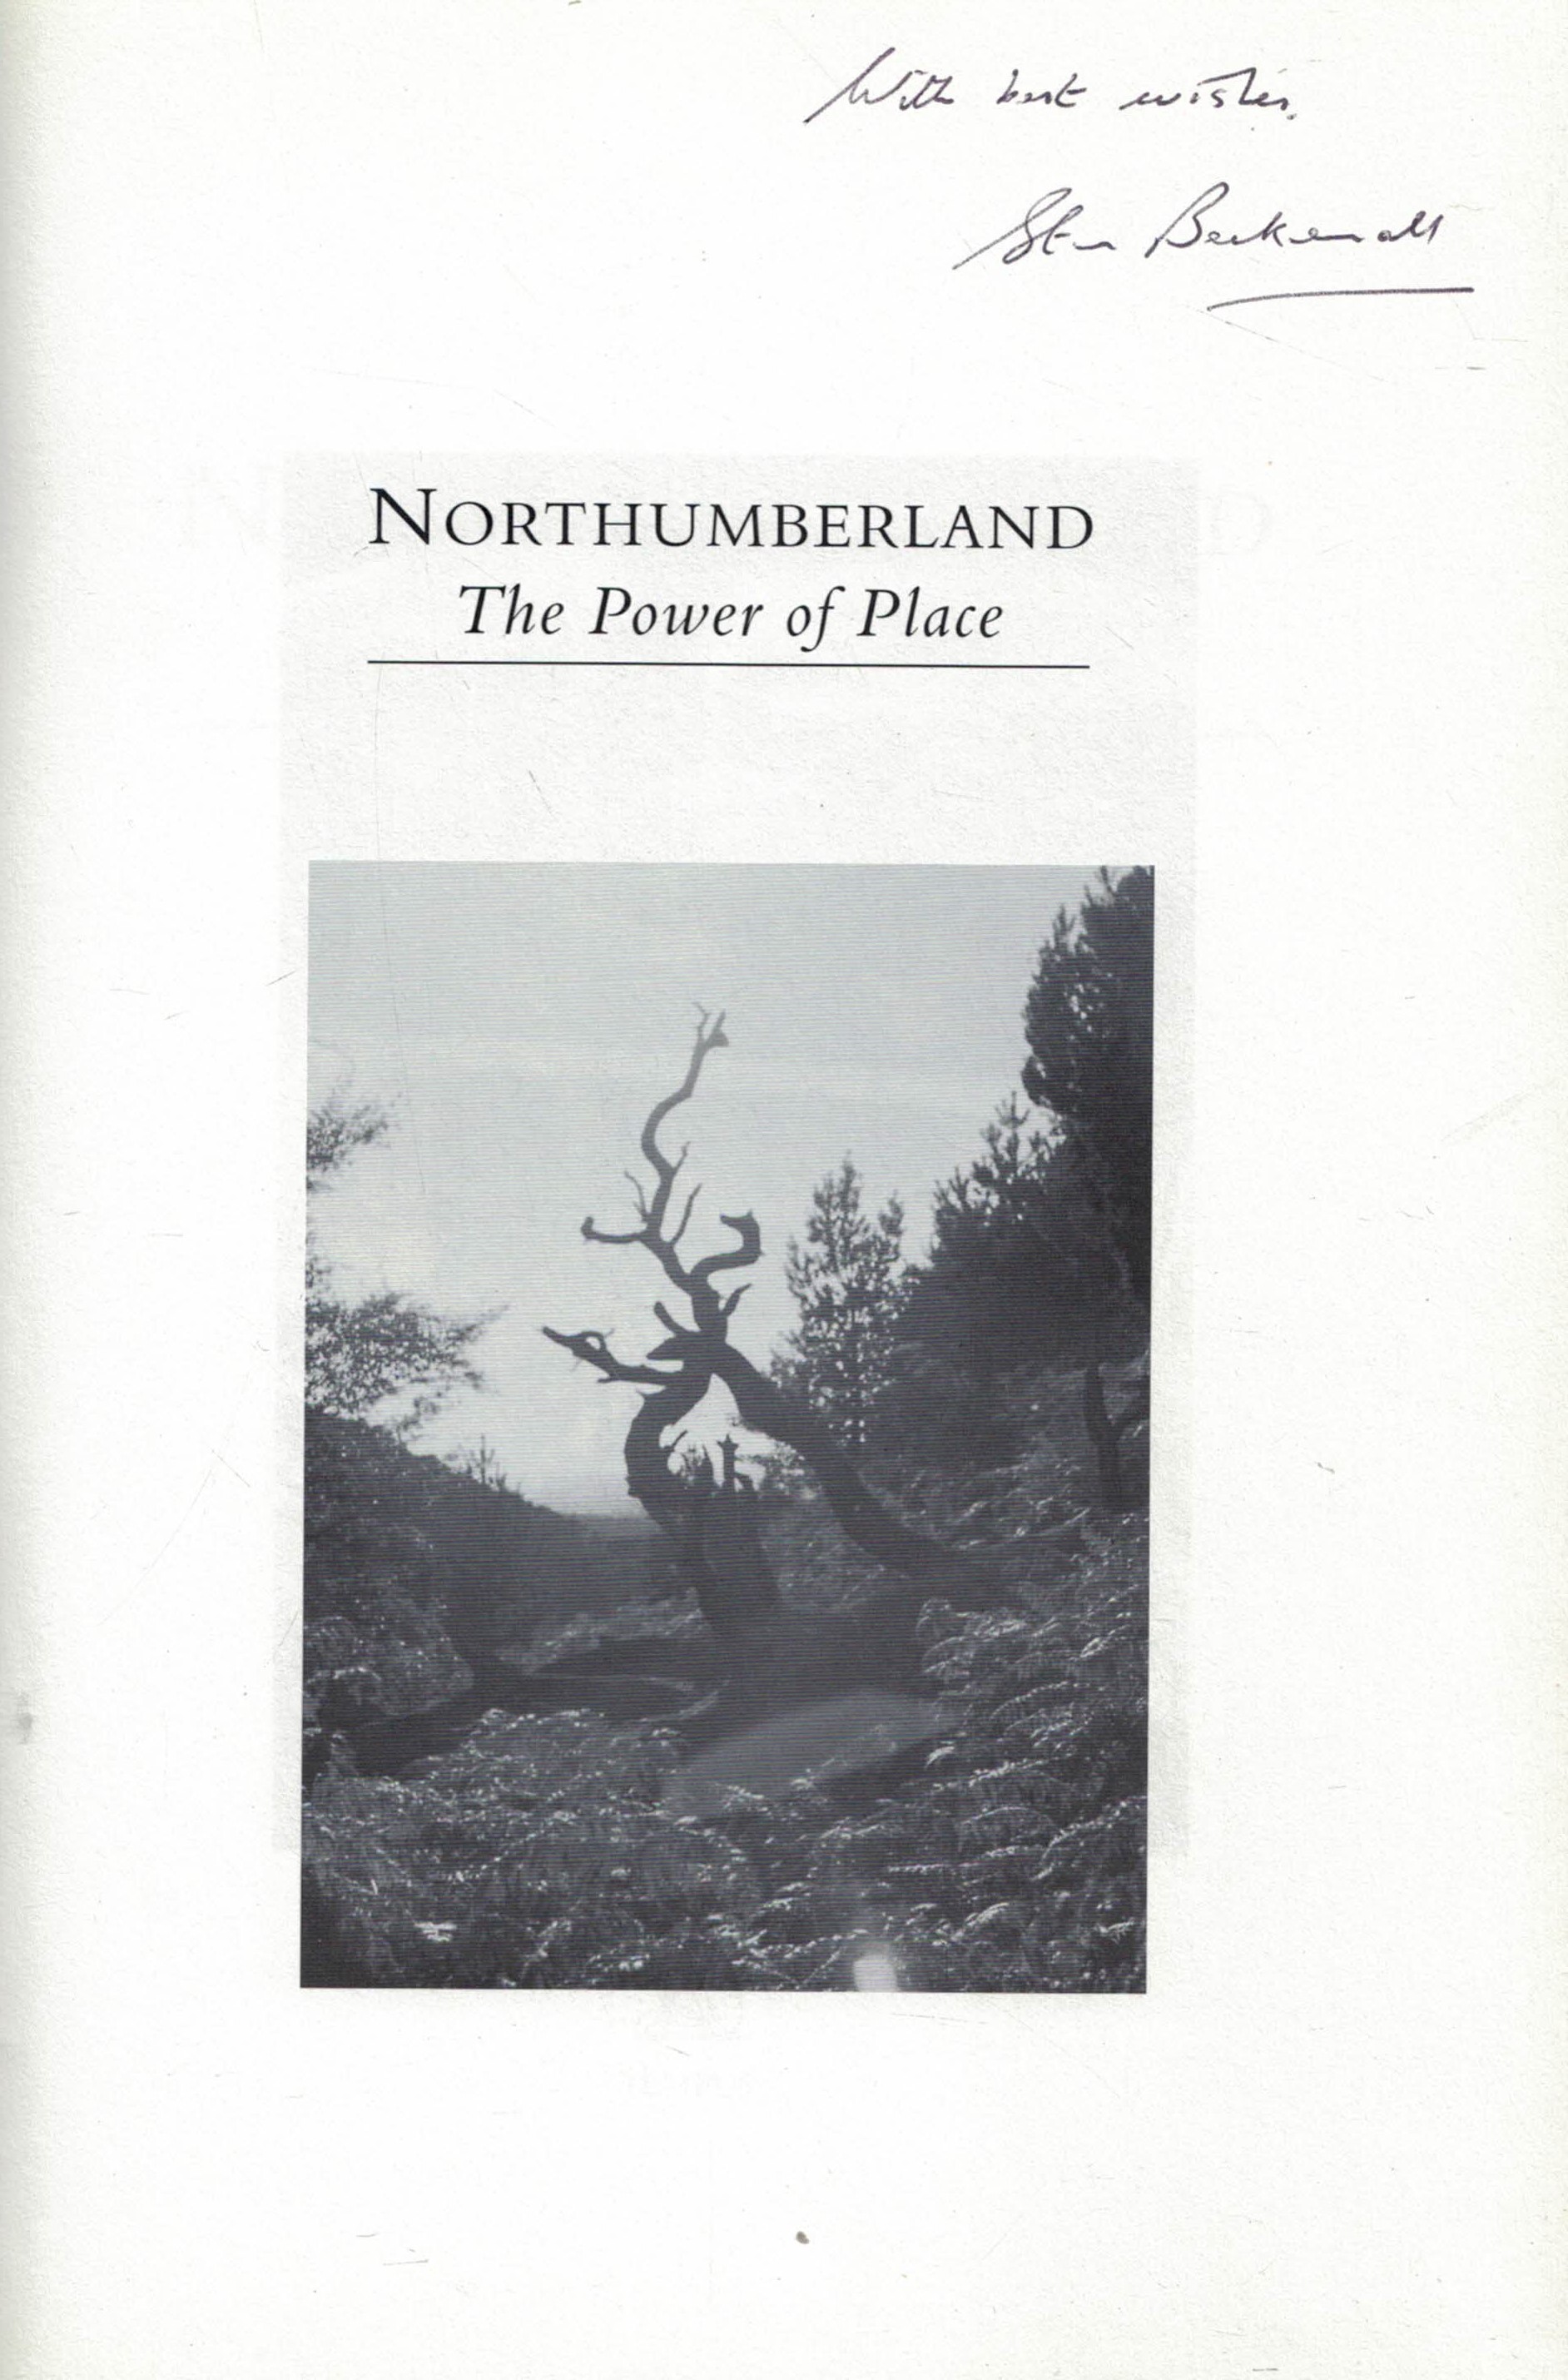 Northumberland. The Power of Place. Signed copy.